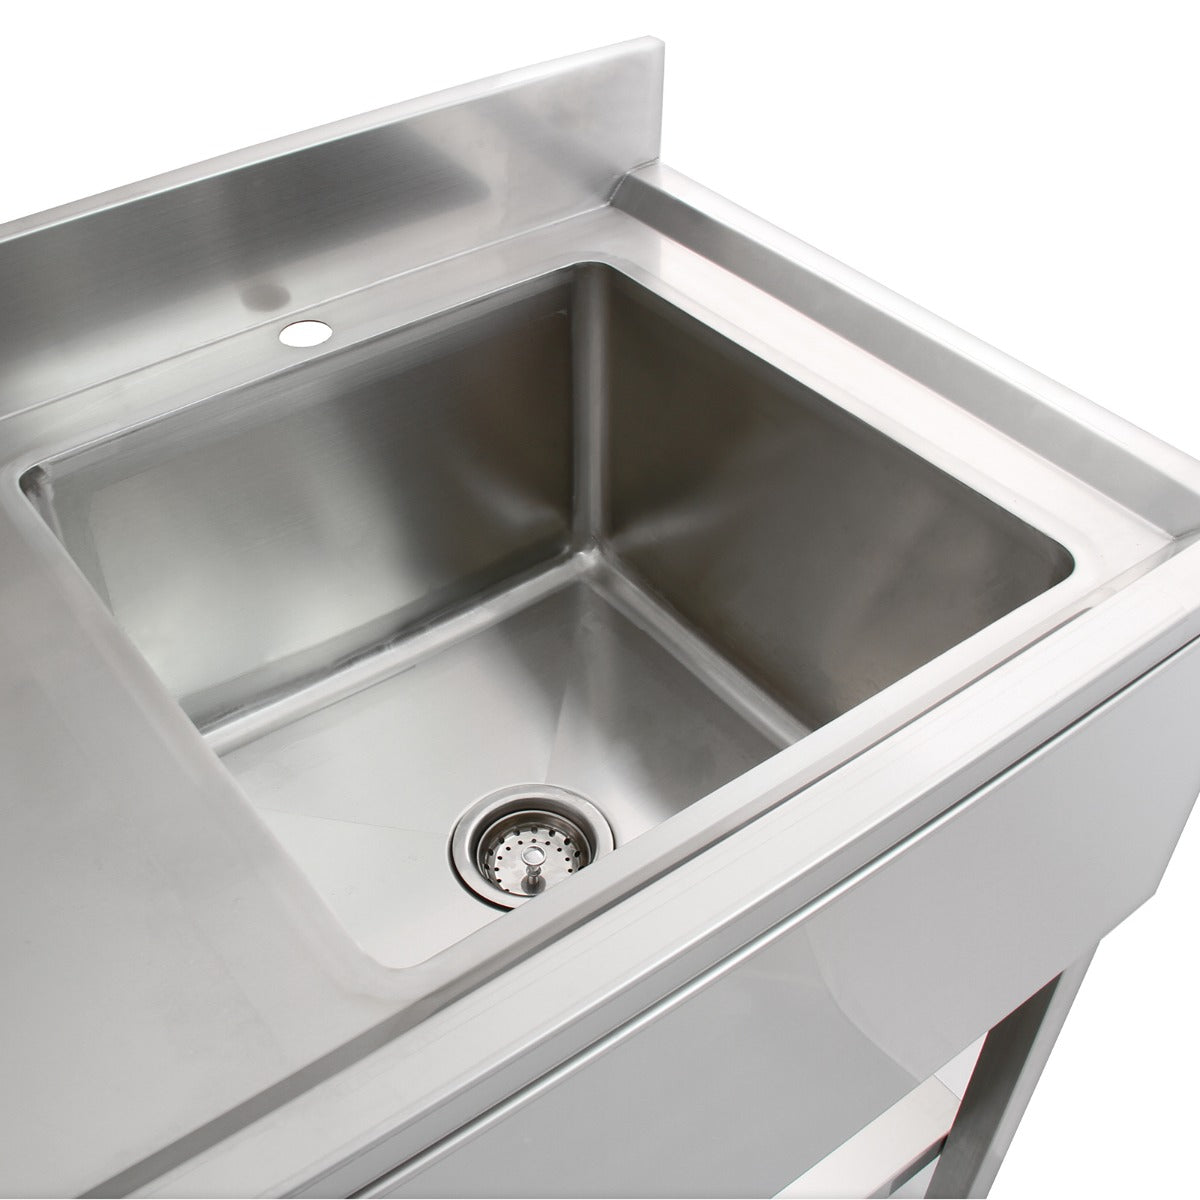 6ft Stainless Steel Catering Bench, Stainless Steel Sink - Left Hand Drainer & 2 x Wall Mounted Shelves